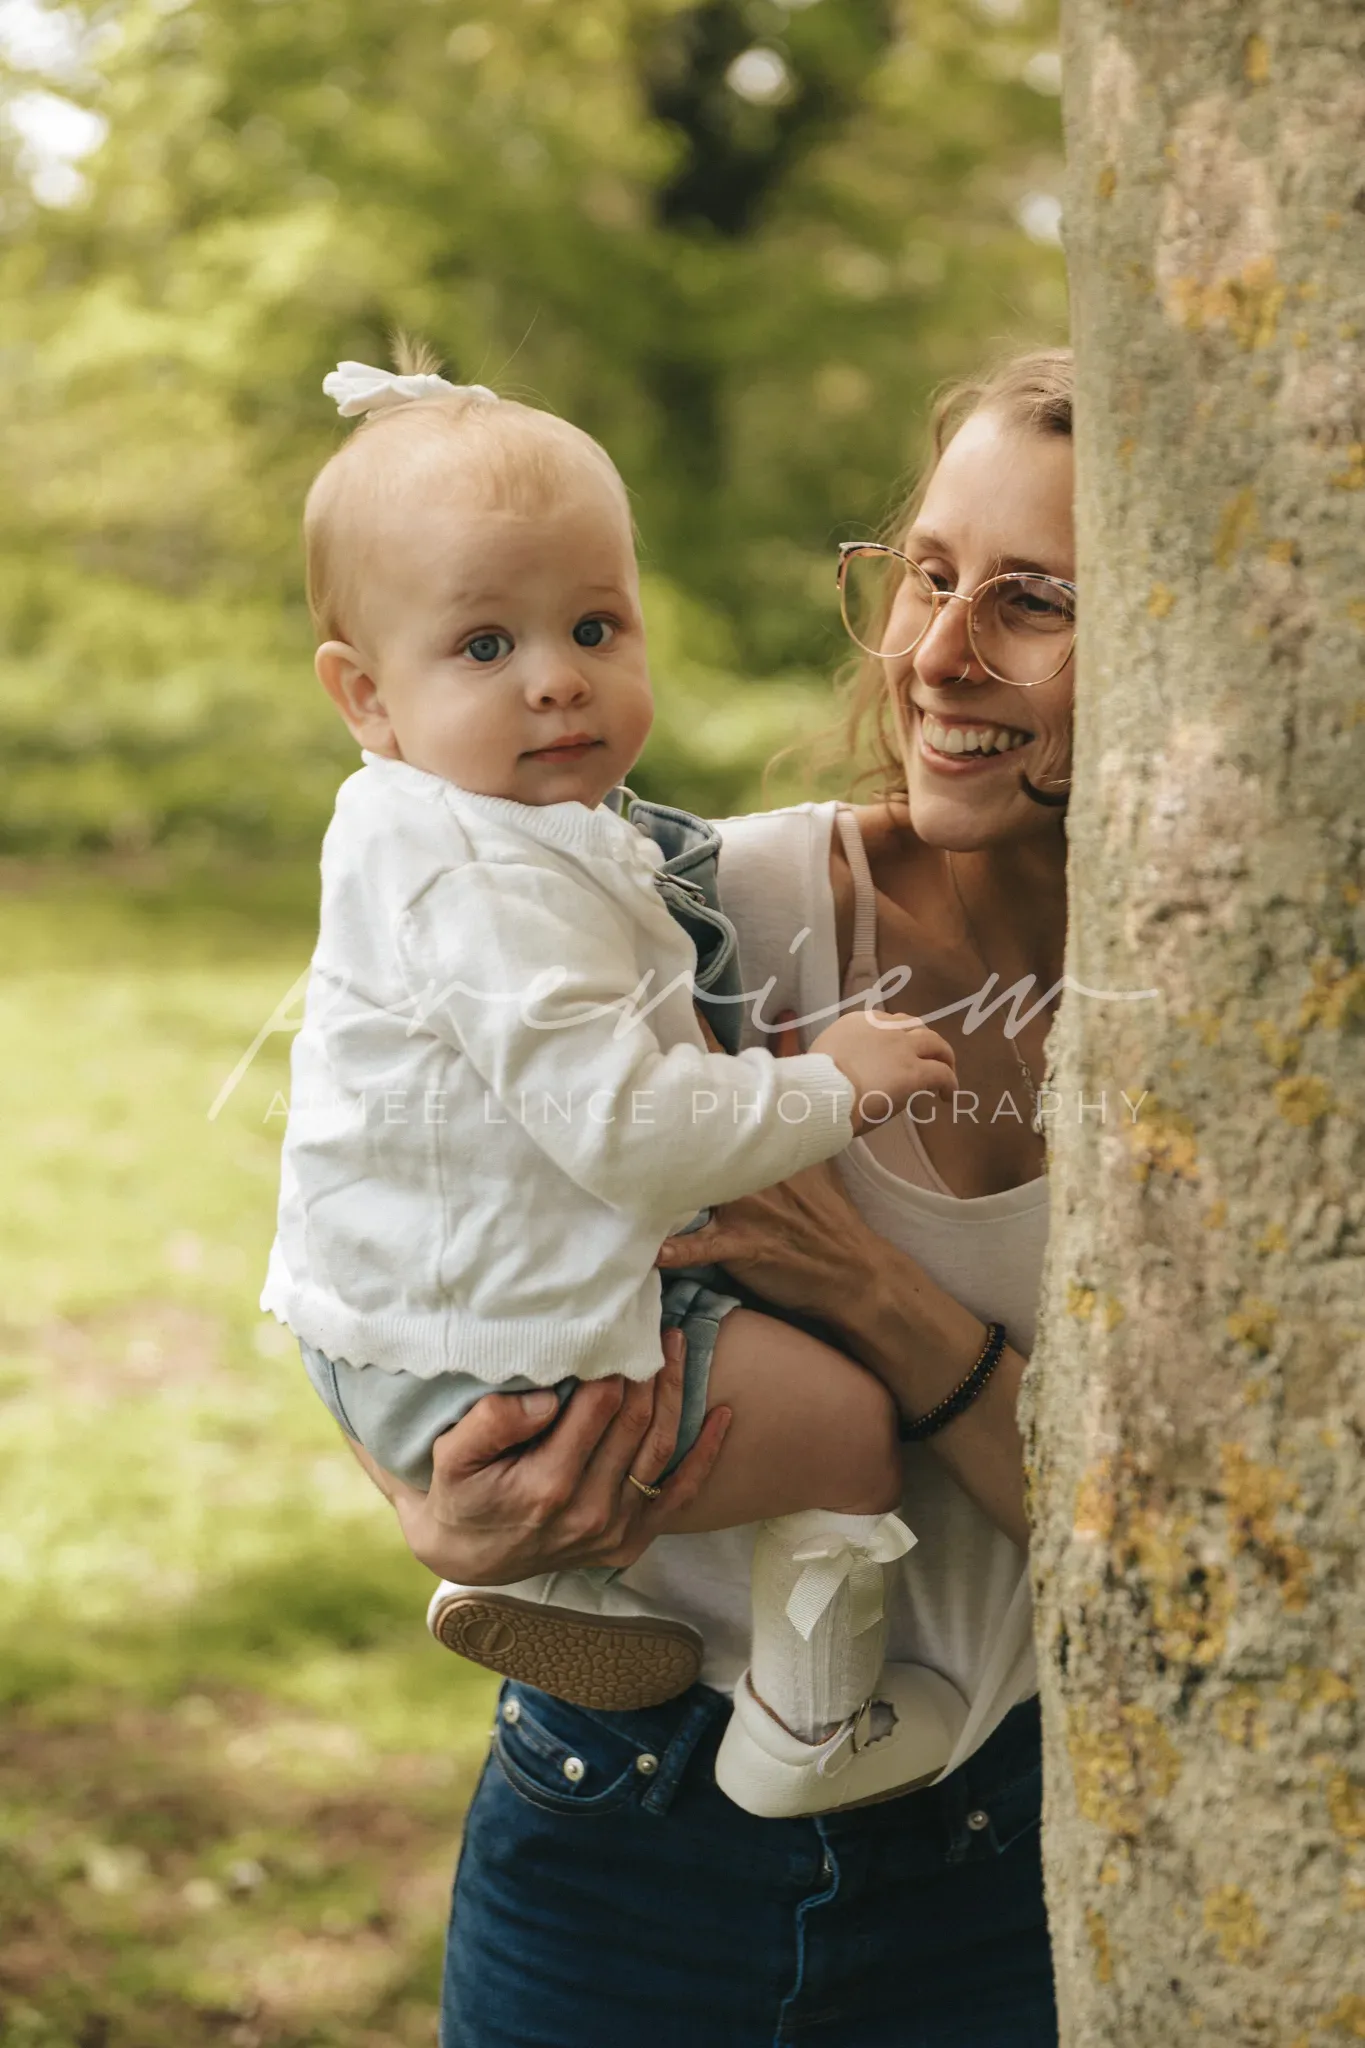 A joyful young woman with glasses and a ponytail, wearing a white top, holds a baby wearing a white shirt and denim. they are near a tree in a lush park, the baby looks at the camera while the woman smiles broadly.